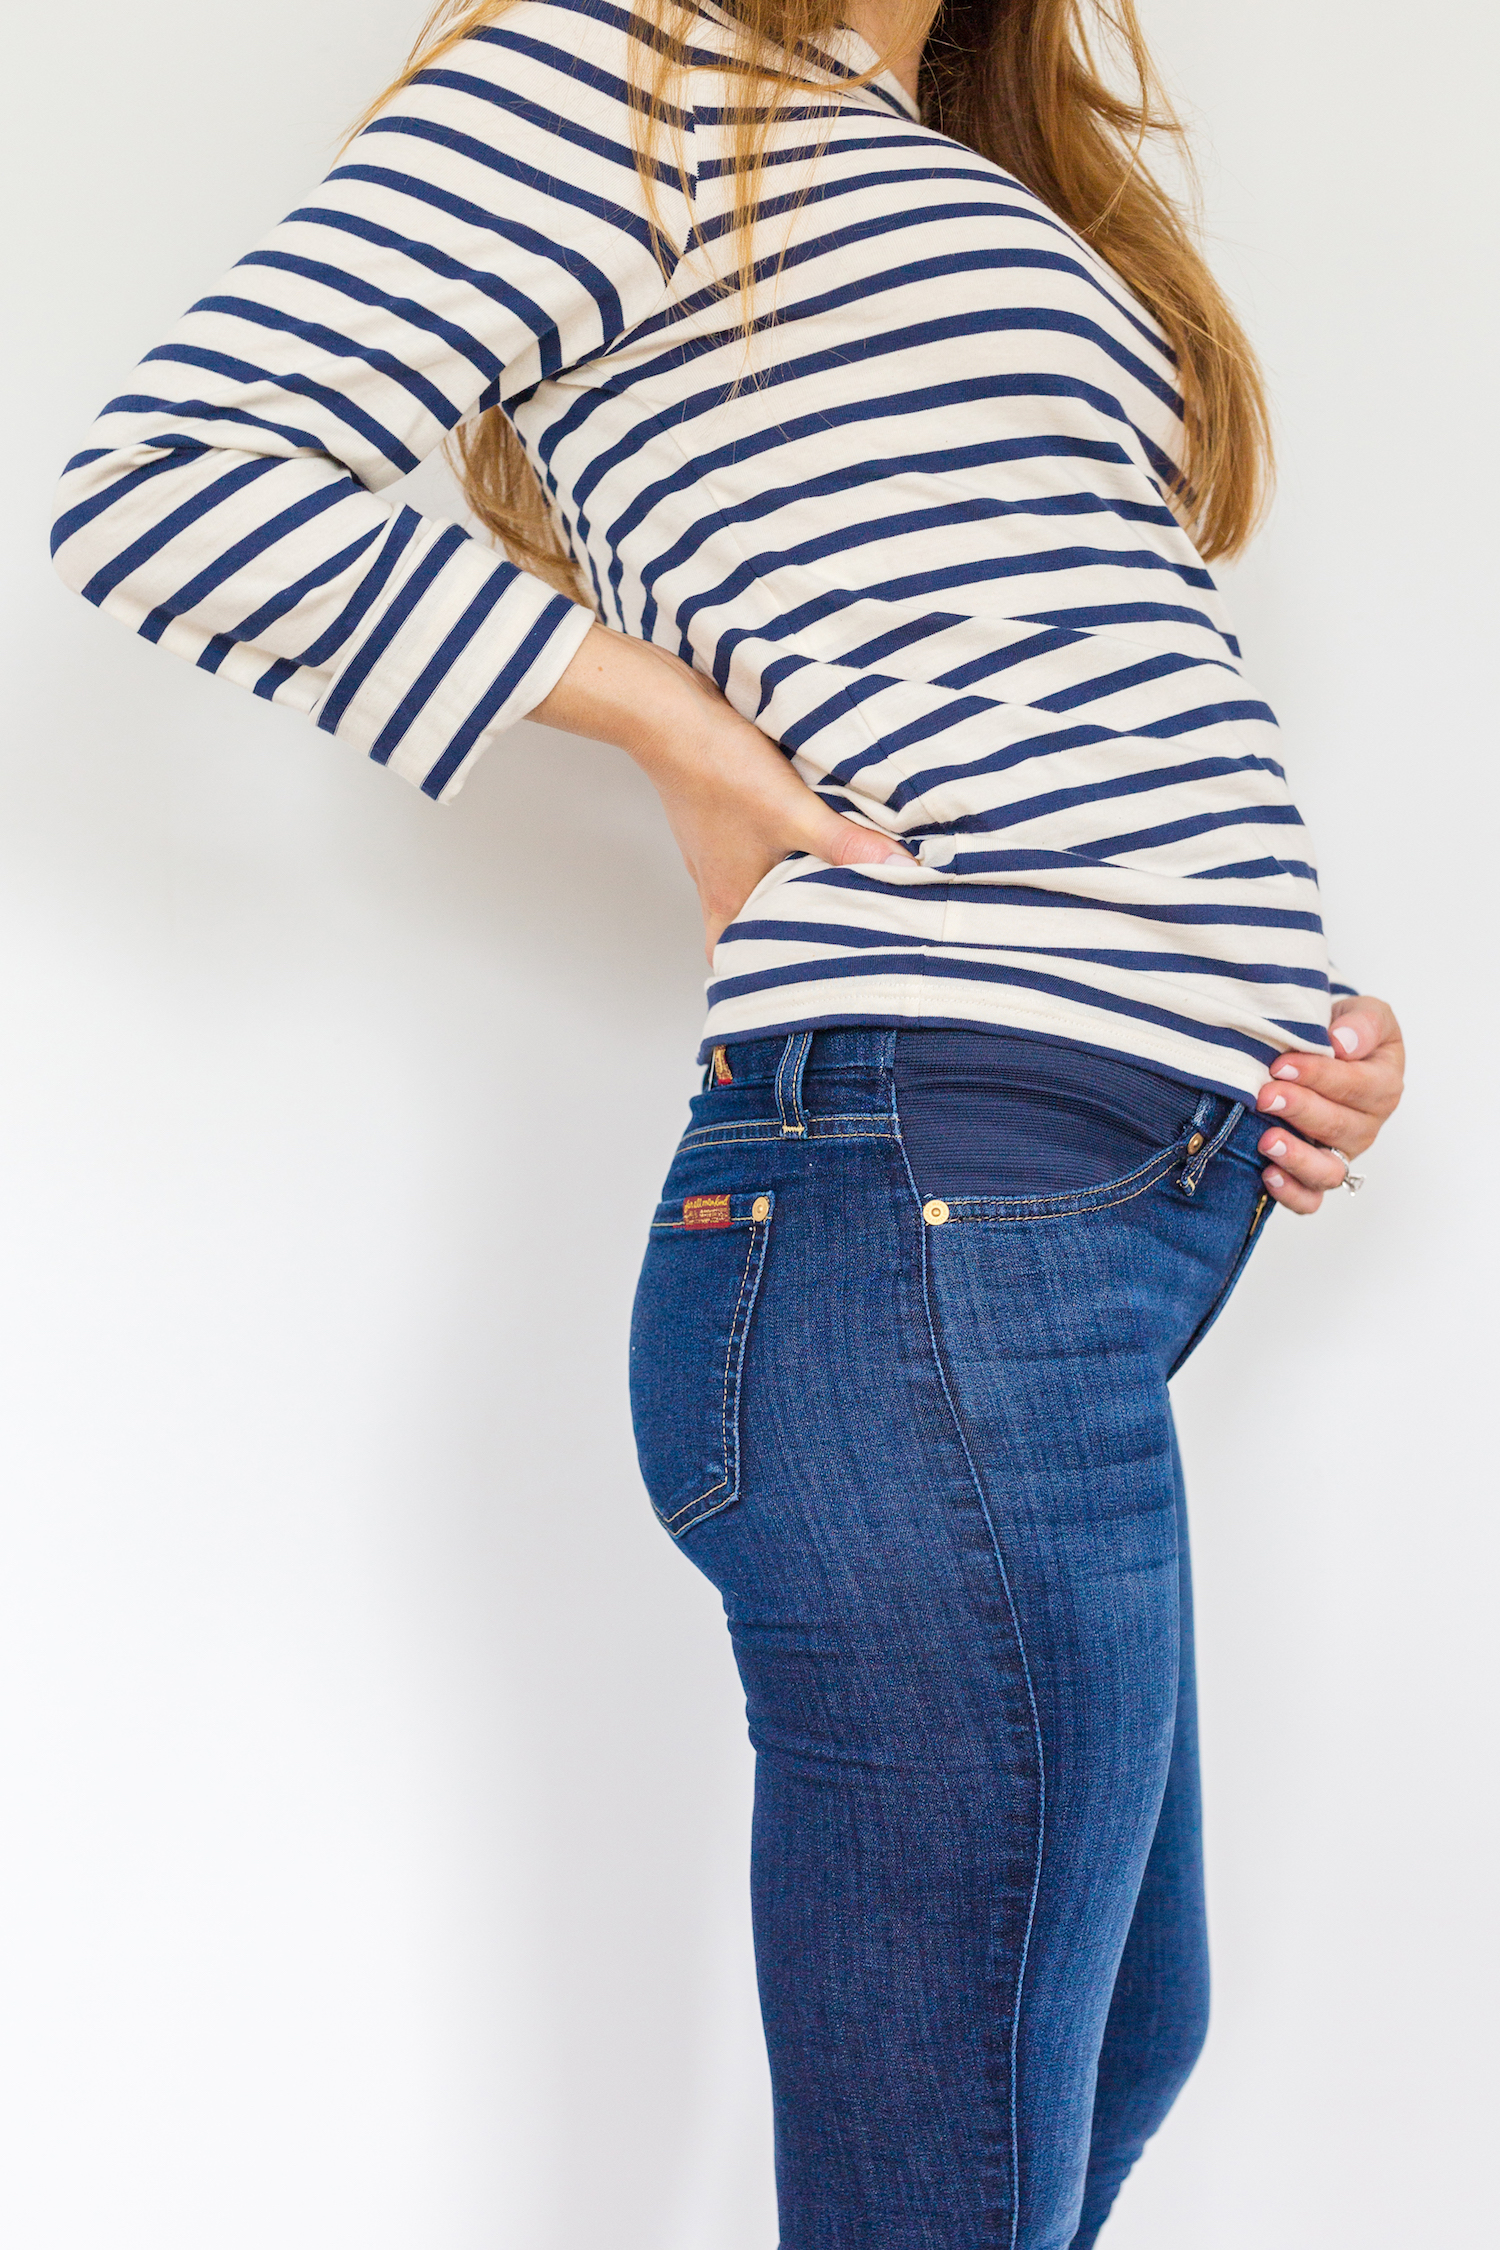 maternity jeans review 7 For All Mankind ankle skinny maternity jeans ...